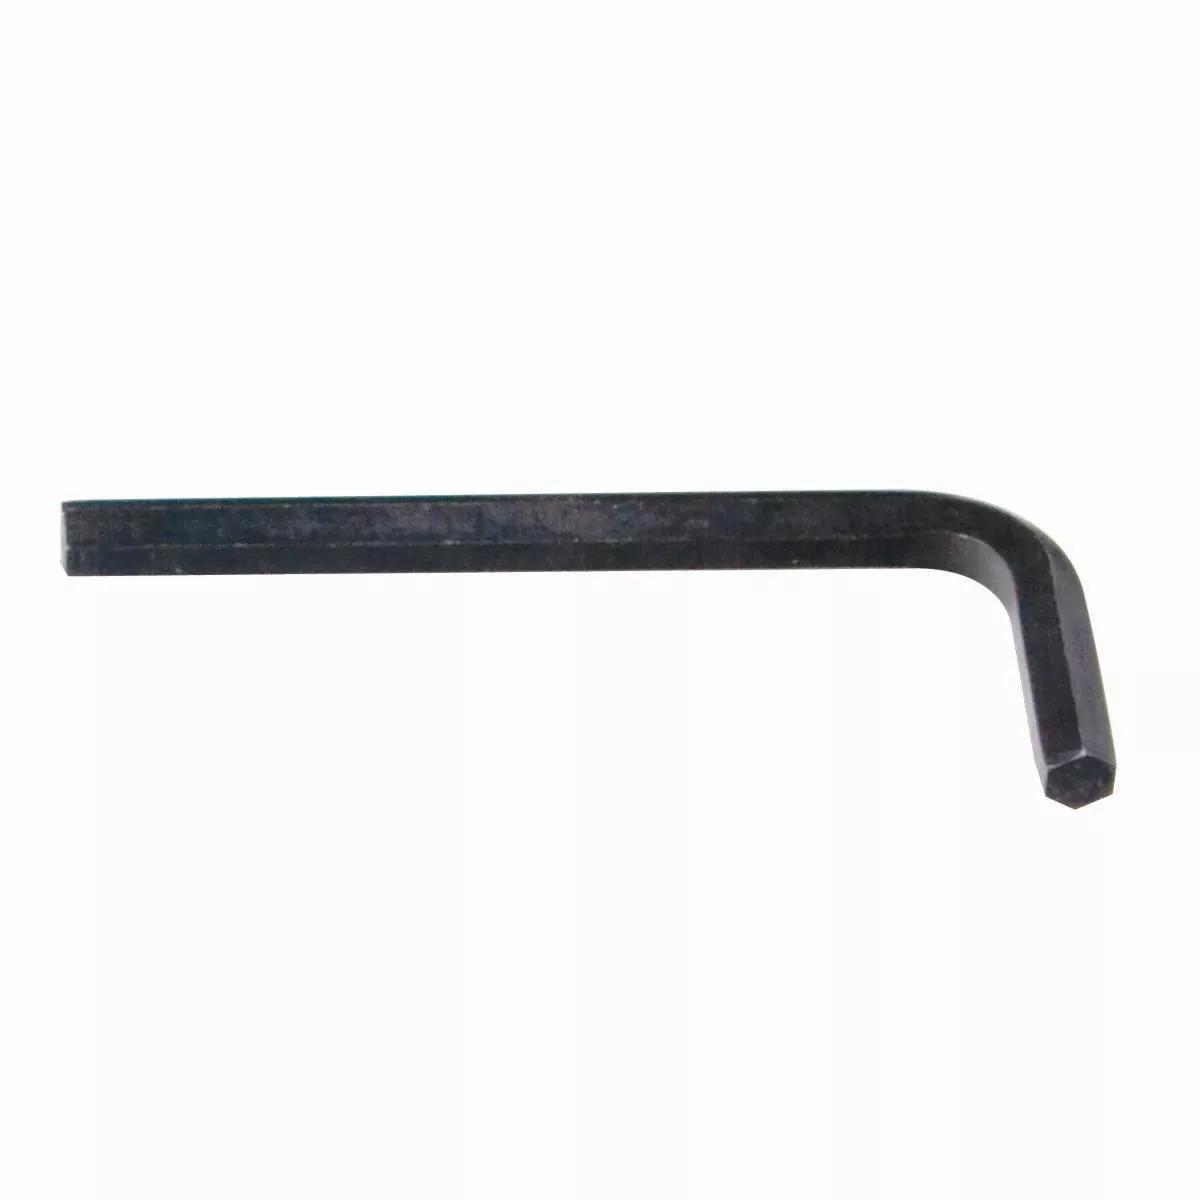 M19.0 Short Arm Hex Key Wrench